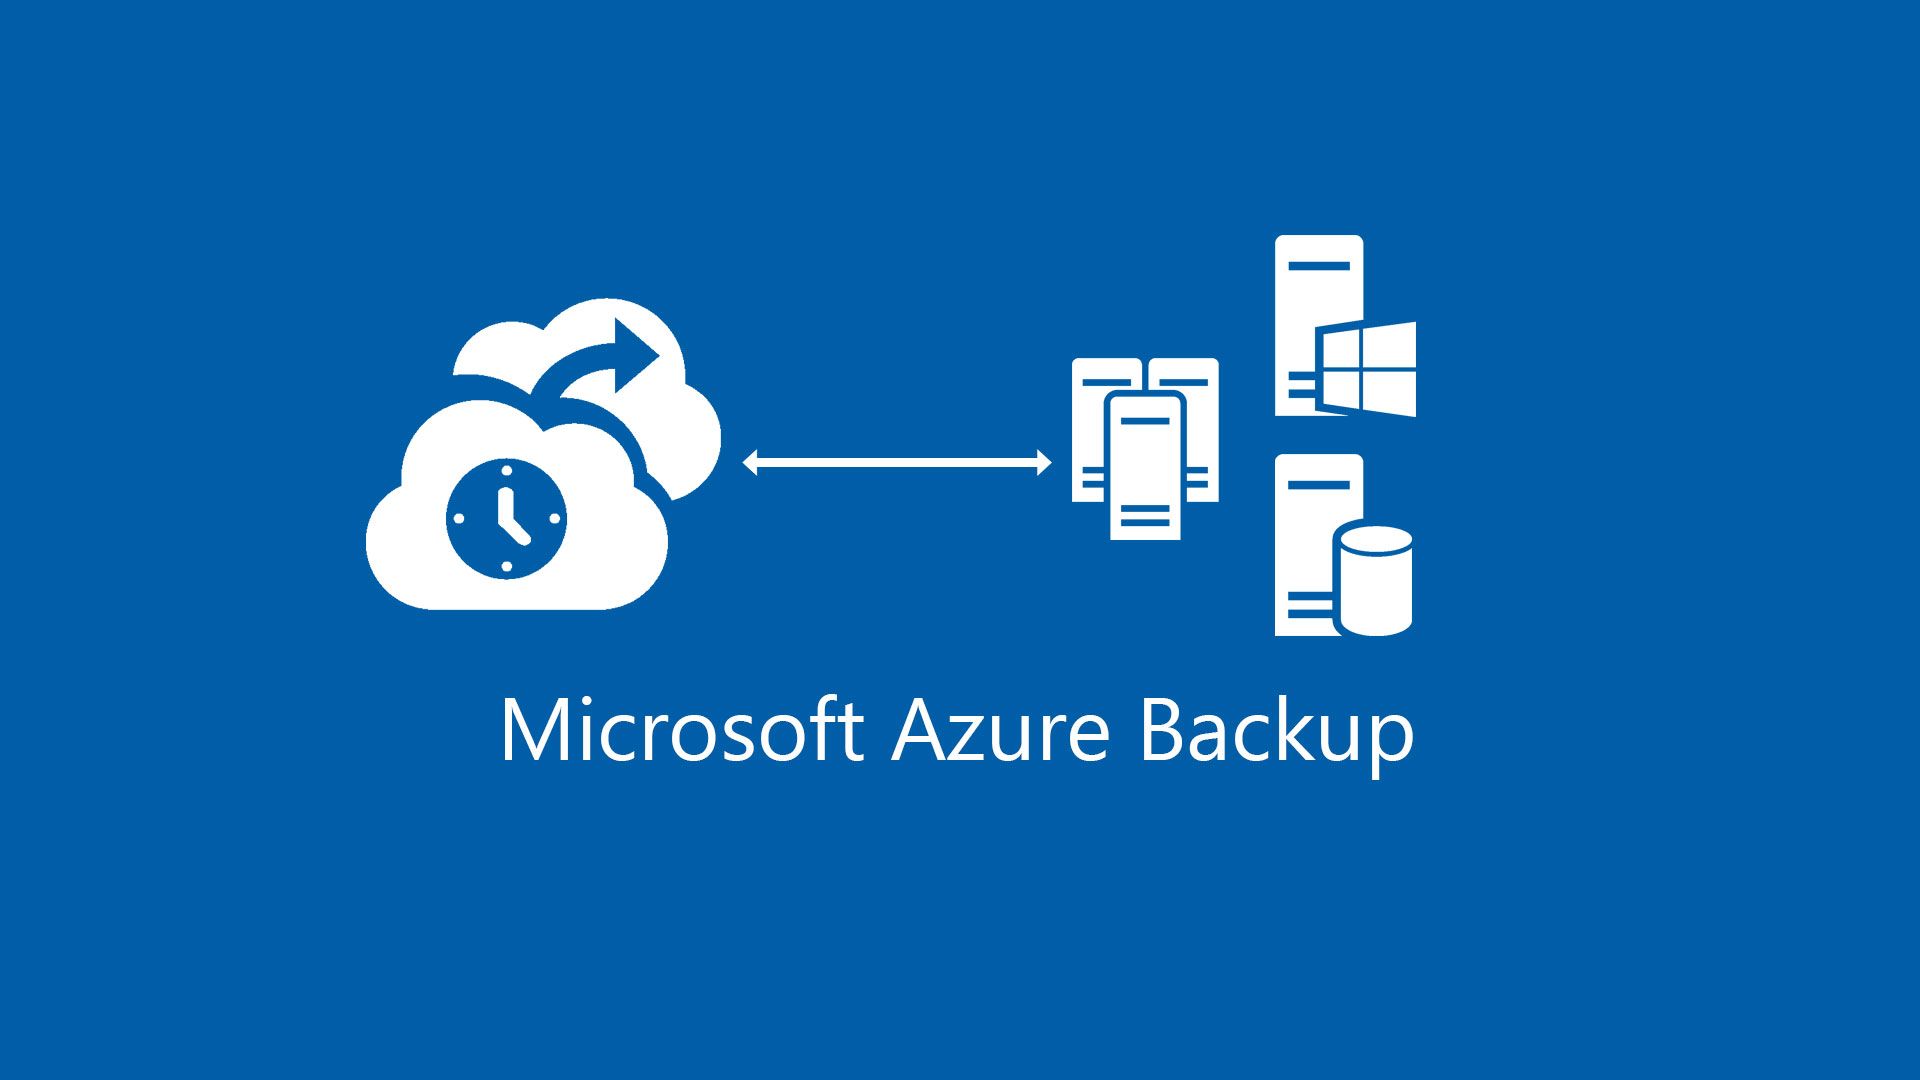 Implementing the Azure backup service for files and Azure VMs